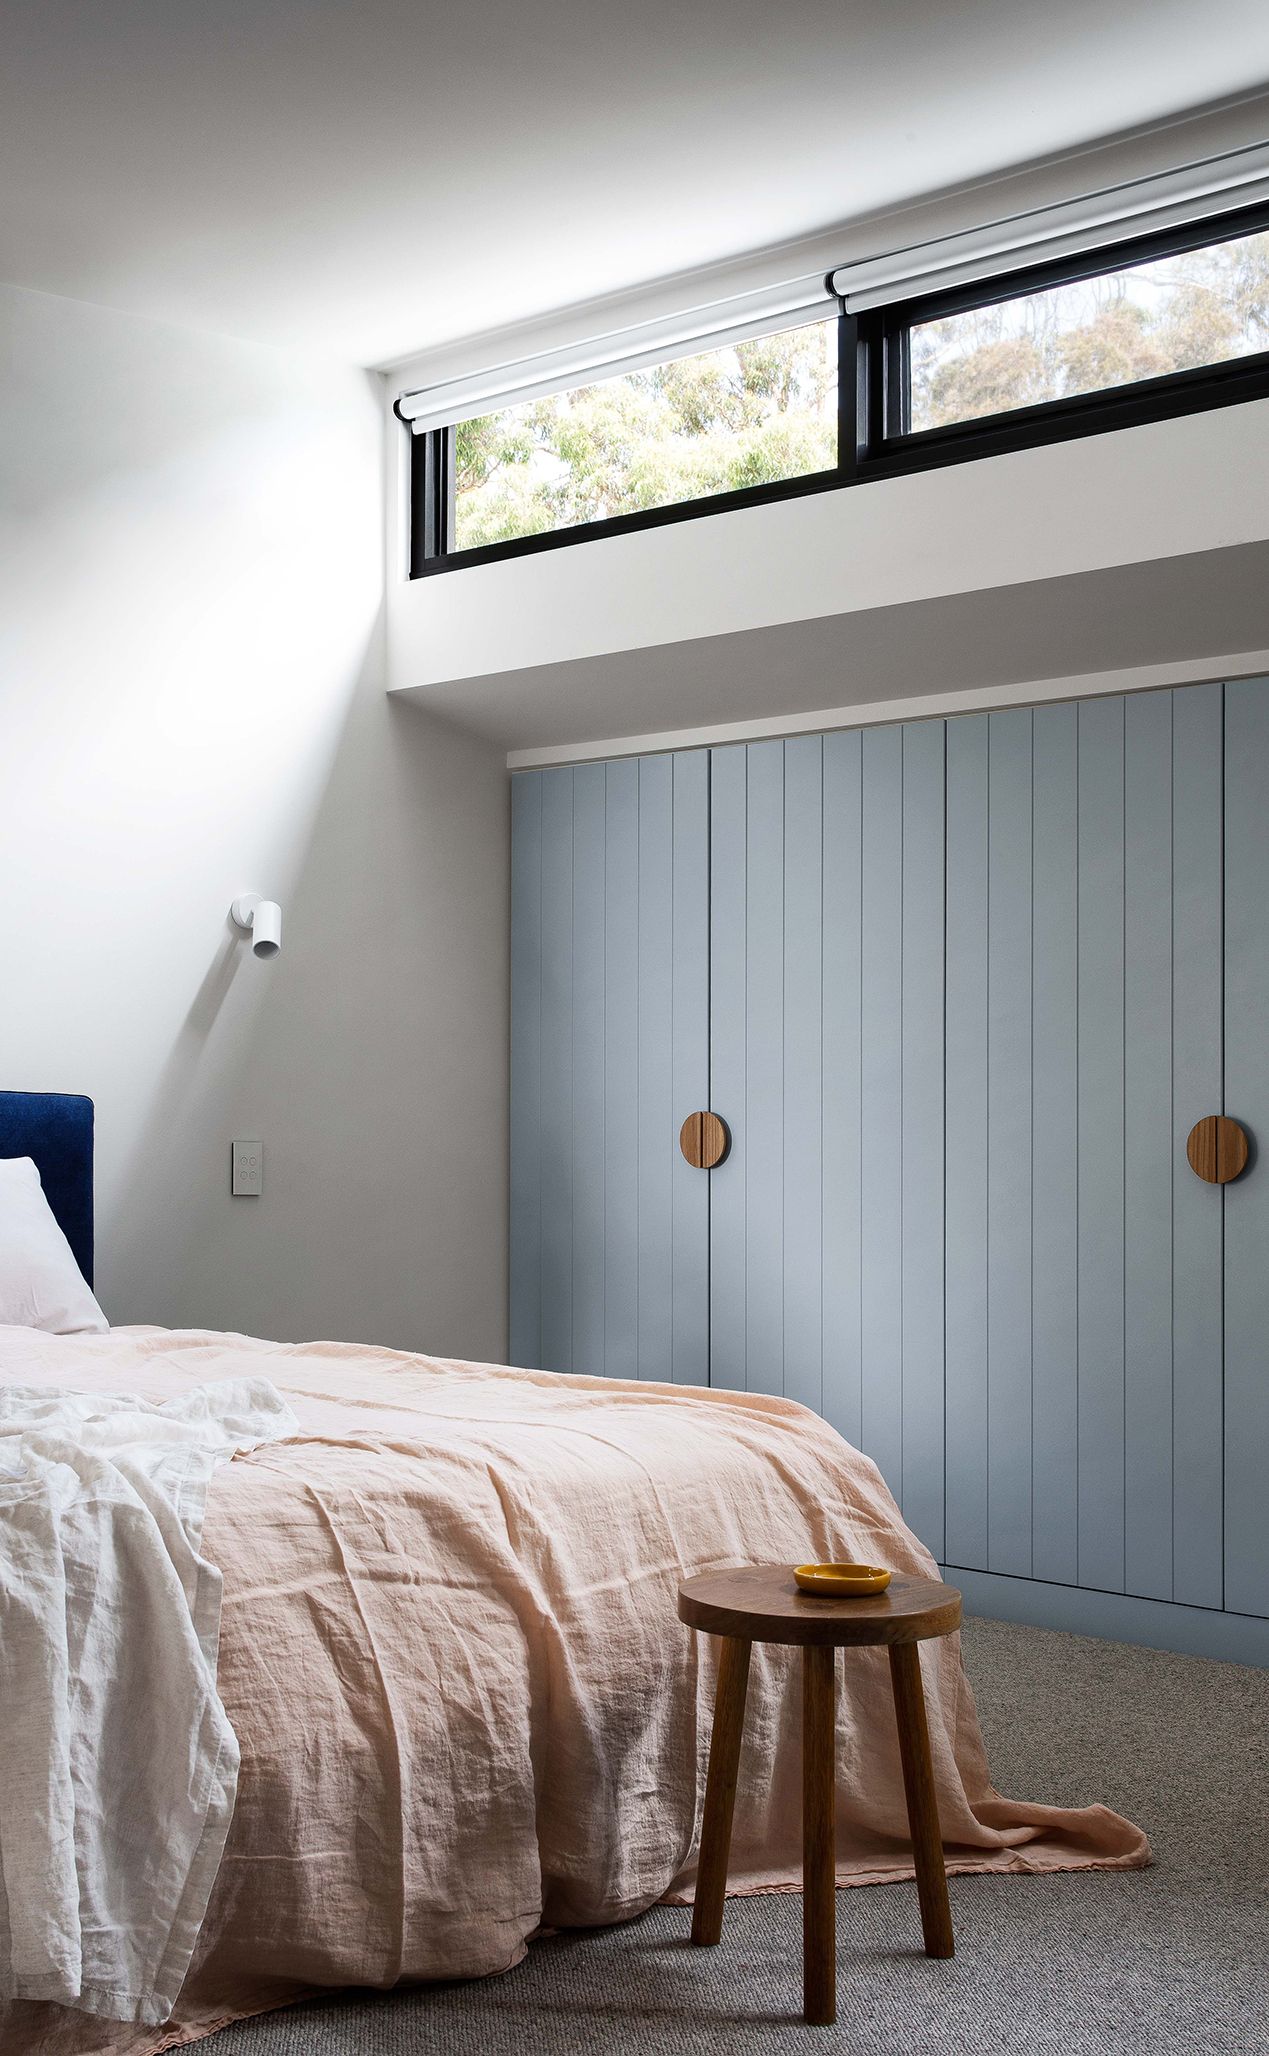 image of Lorne Beach House - bedroom joinery